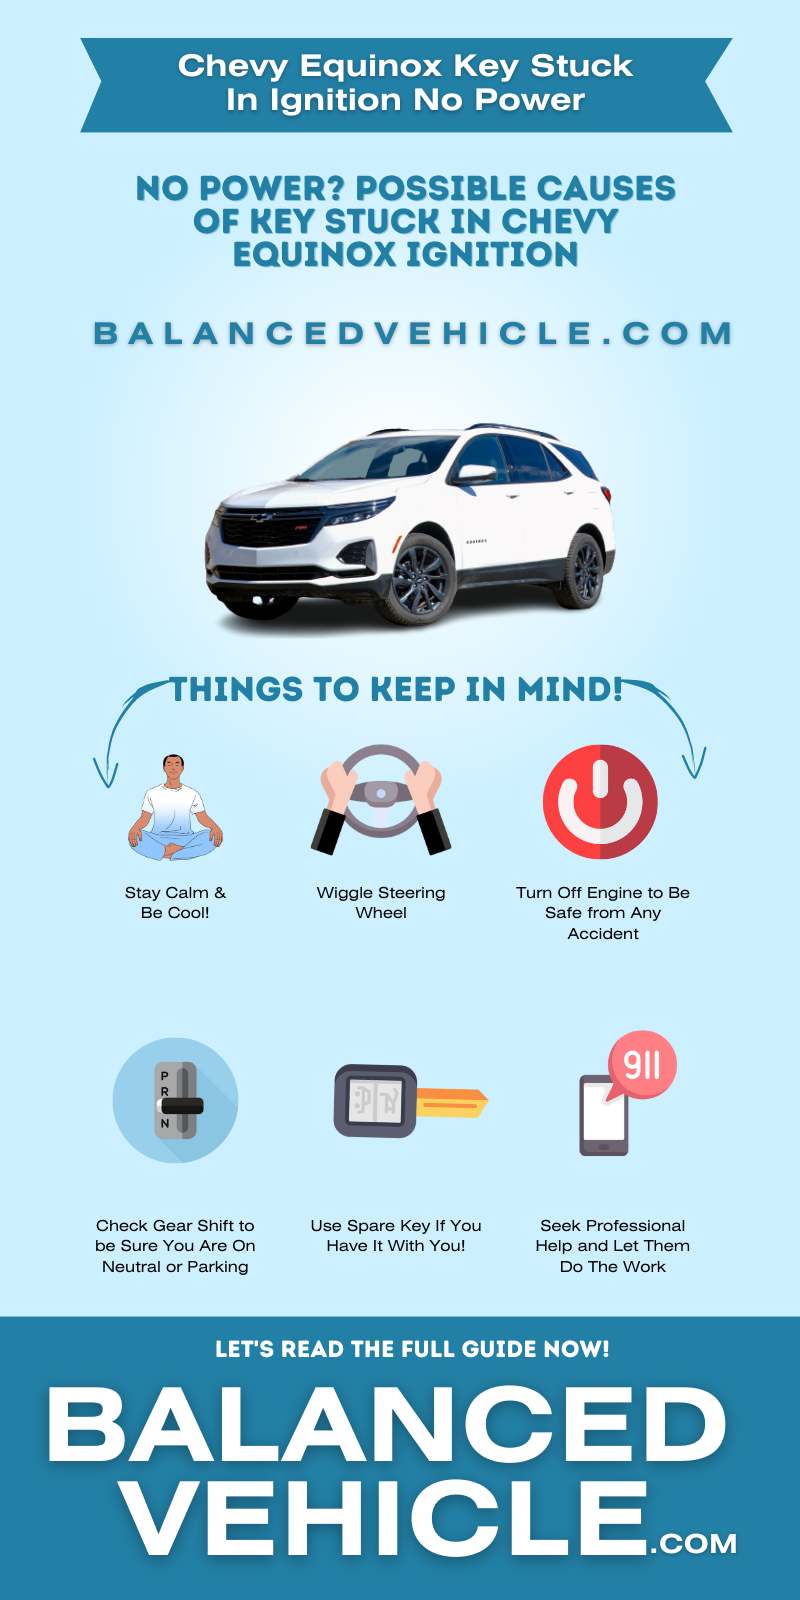 Chevy Equinox Key Stuck In Ignition No Power- Infographic 